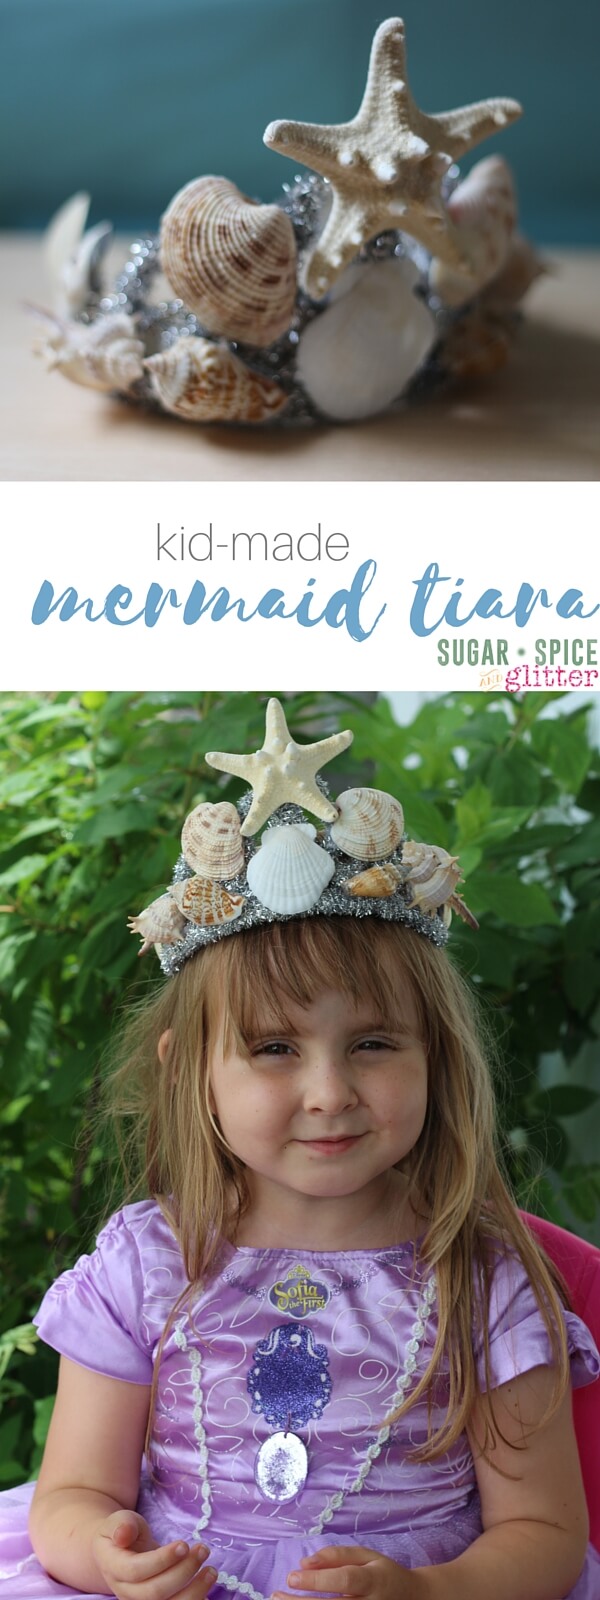 Kid-Made Mermaid Tiara - a gorgeous DIY tiara for a mermaid costume or mermaid party. One of many awesome mermaid play and kids craft ideas on this blog - she threw an amazing Mermaid Party for her daughter on a budget